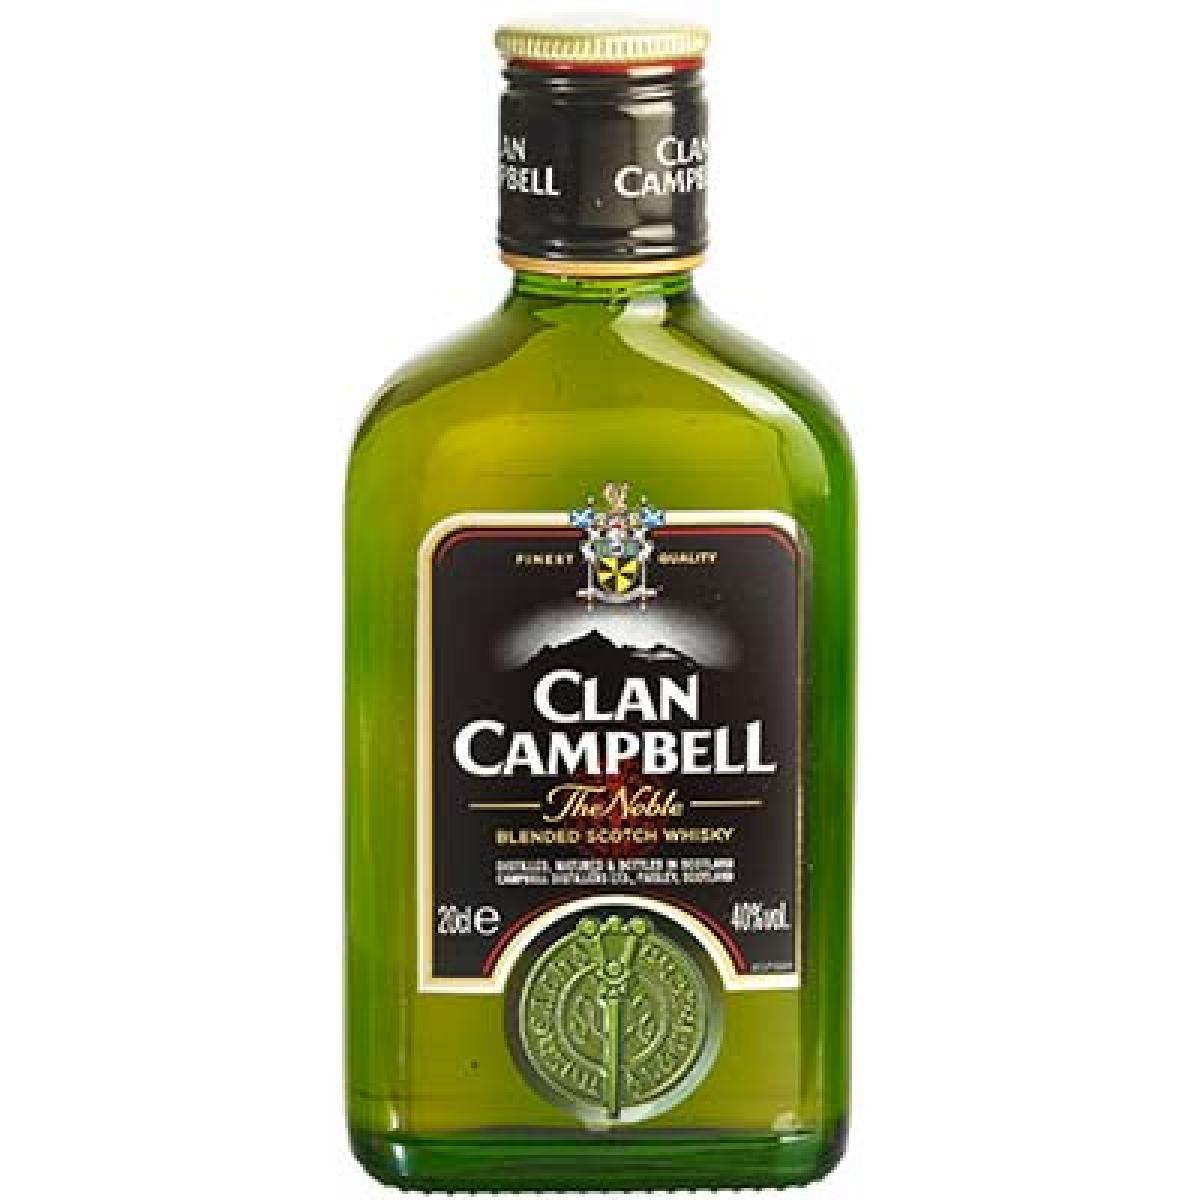 FLASK WHISKY CLAN CAMPBEL